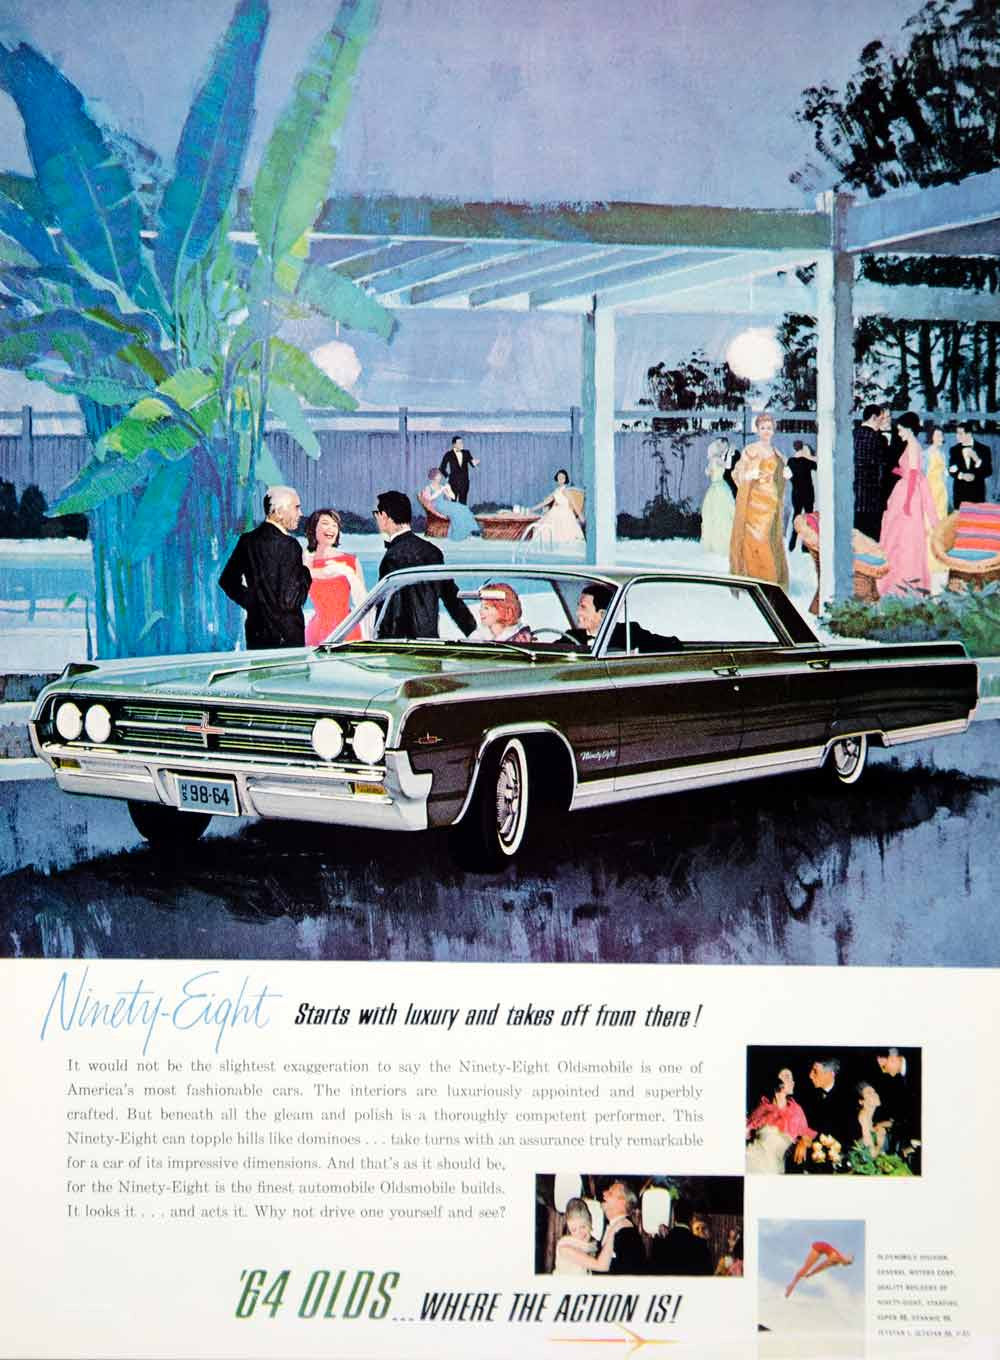 1963 Ad Vintage 1964 Ninety-Eight Oldsmobile Luxury Car GM Automobile Olds YHB5 - Period Paper
